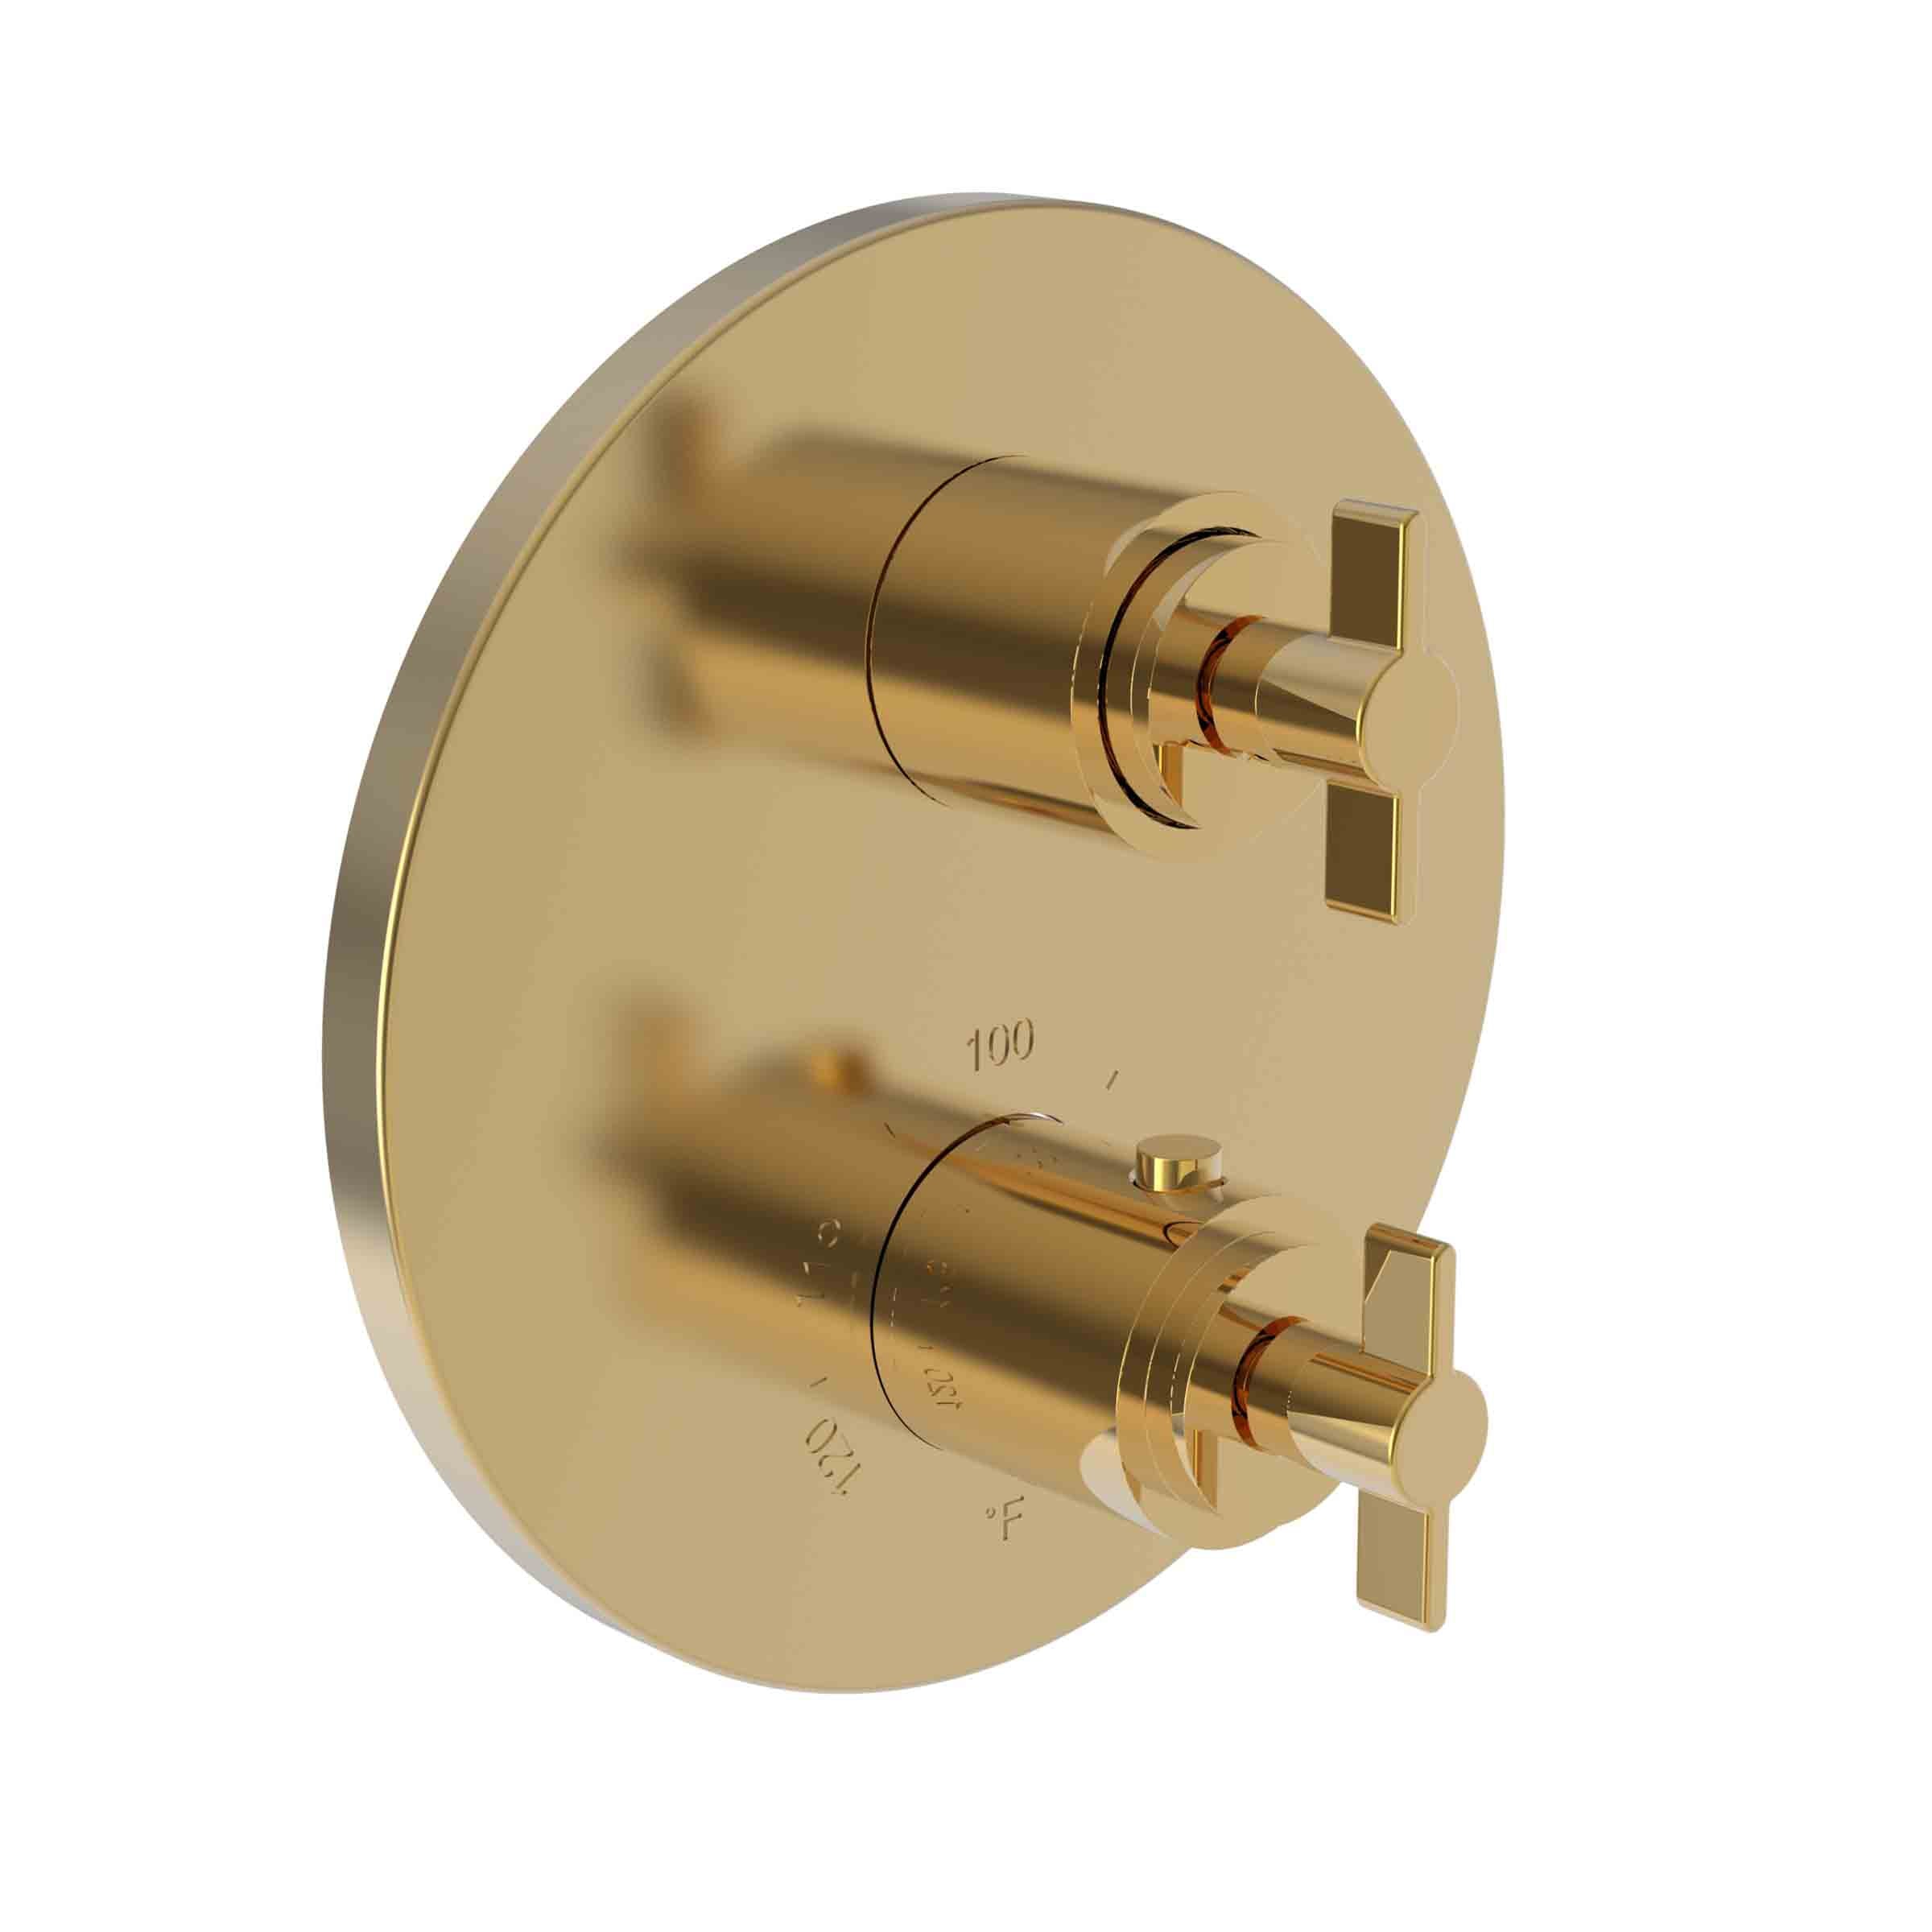 Newport Brass Tolmin 1/2" Round Thermostatic Trim Plate with Handle